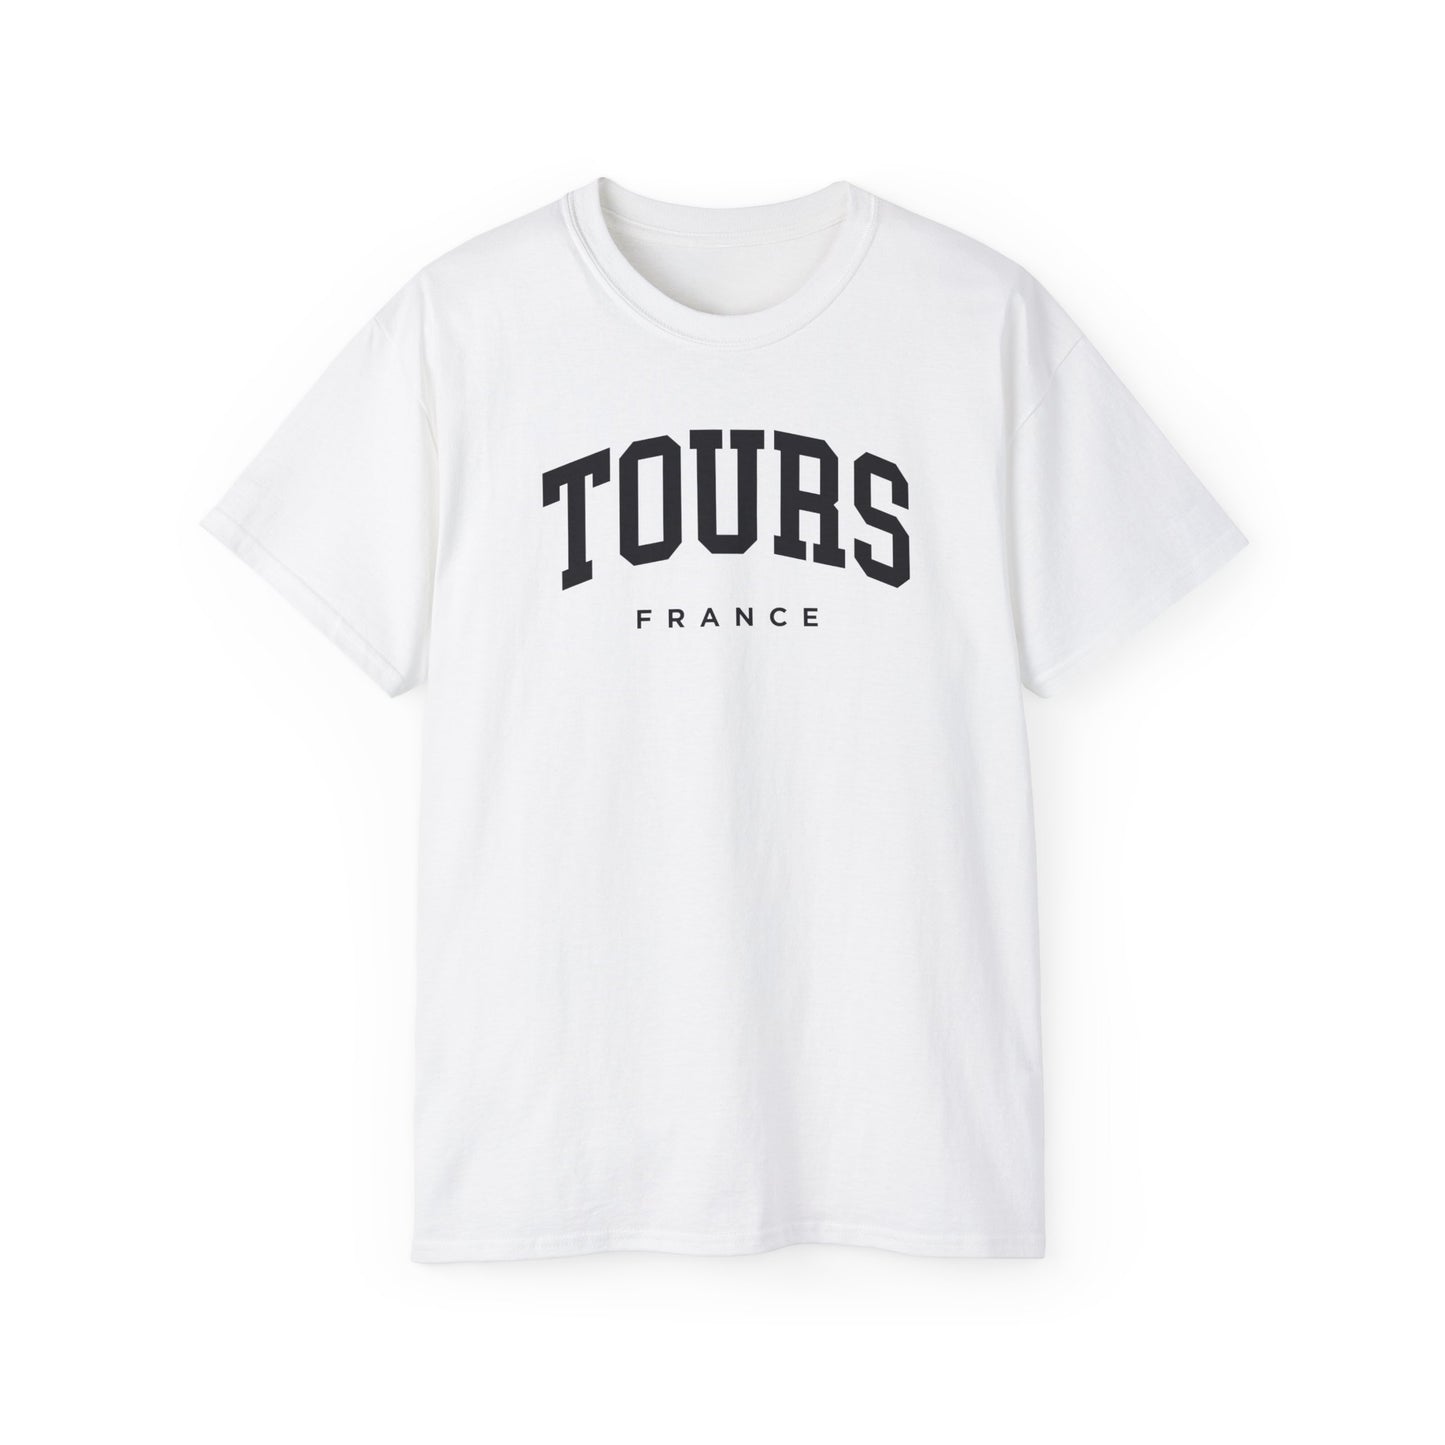 Tours France Tee